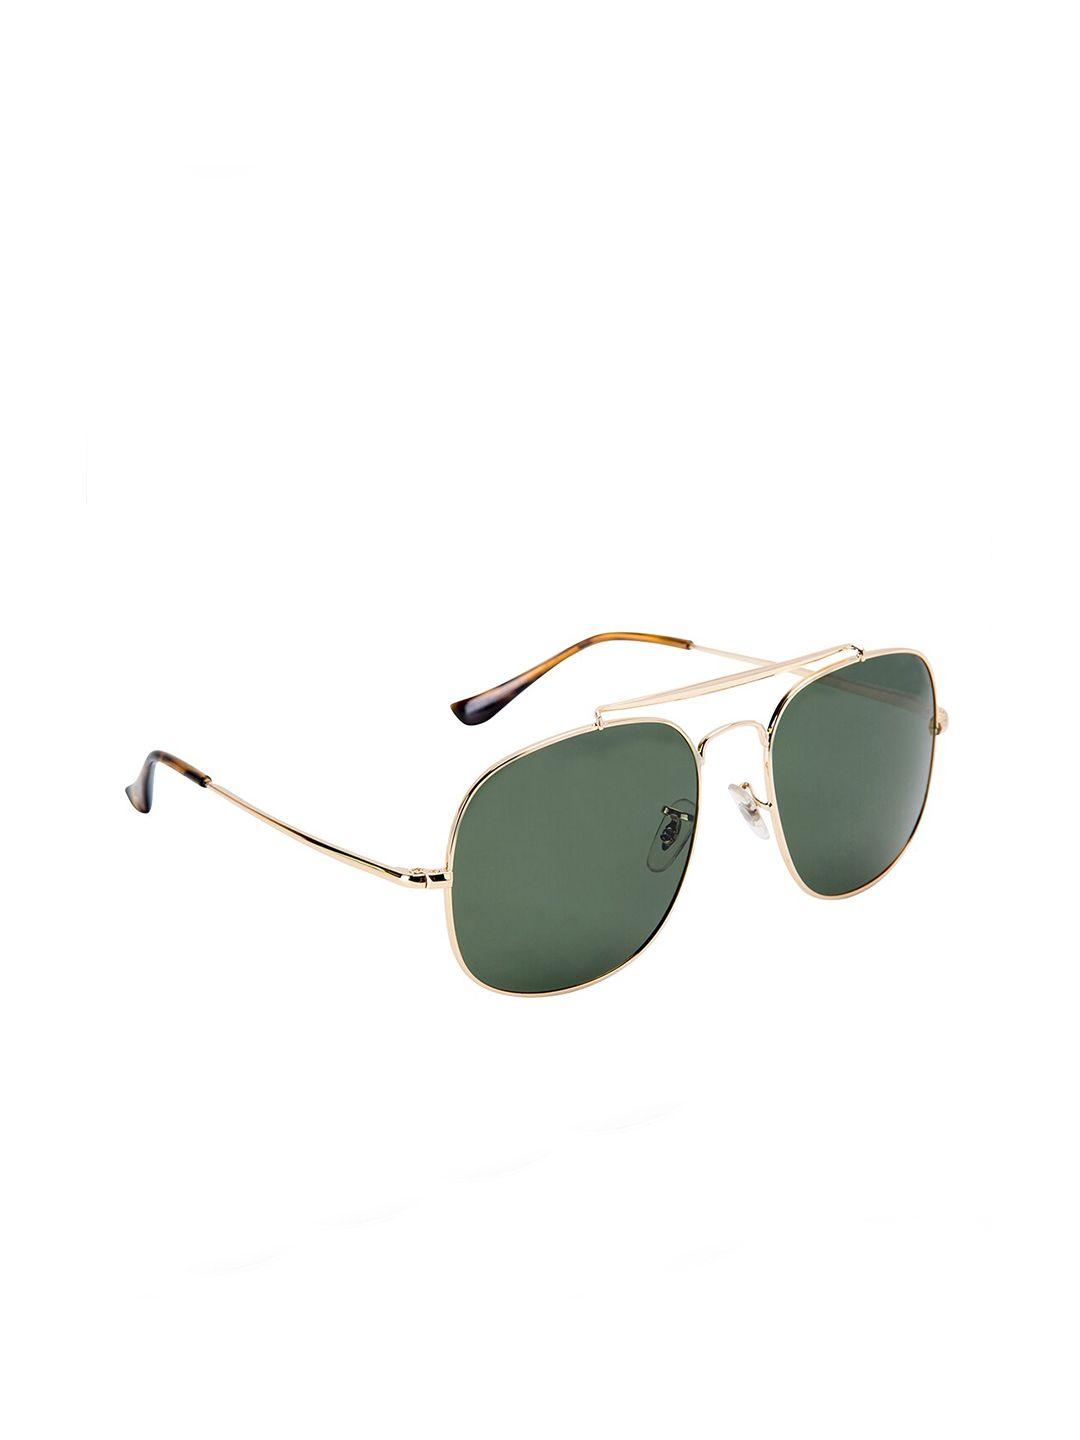 gio collection unisex green lens & gold-toned square sunglasses - gm10122c01-green